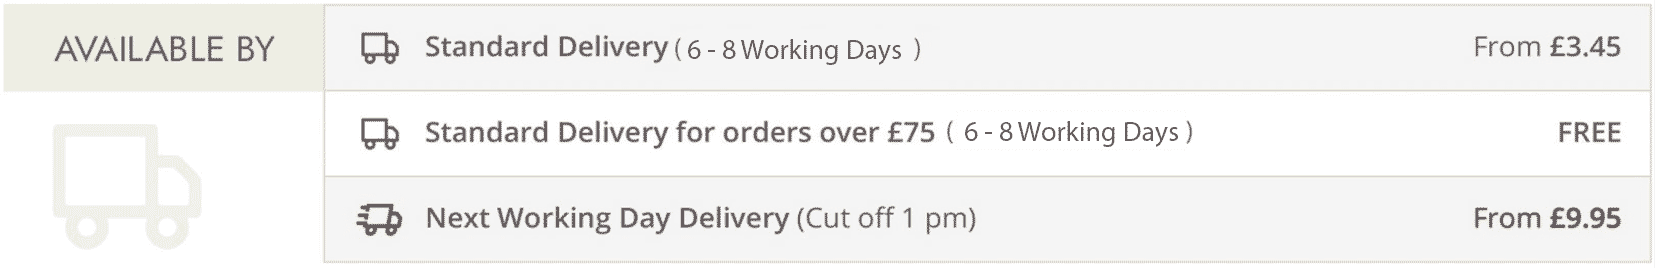 Delivery times 6 - 8 working days